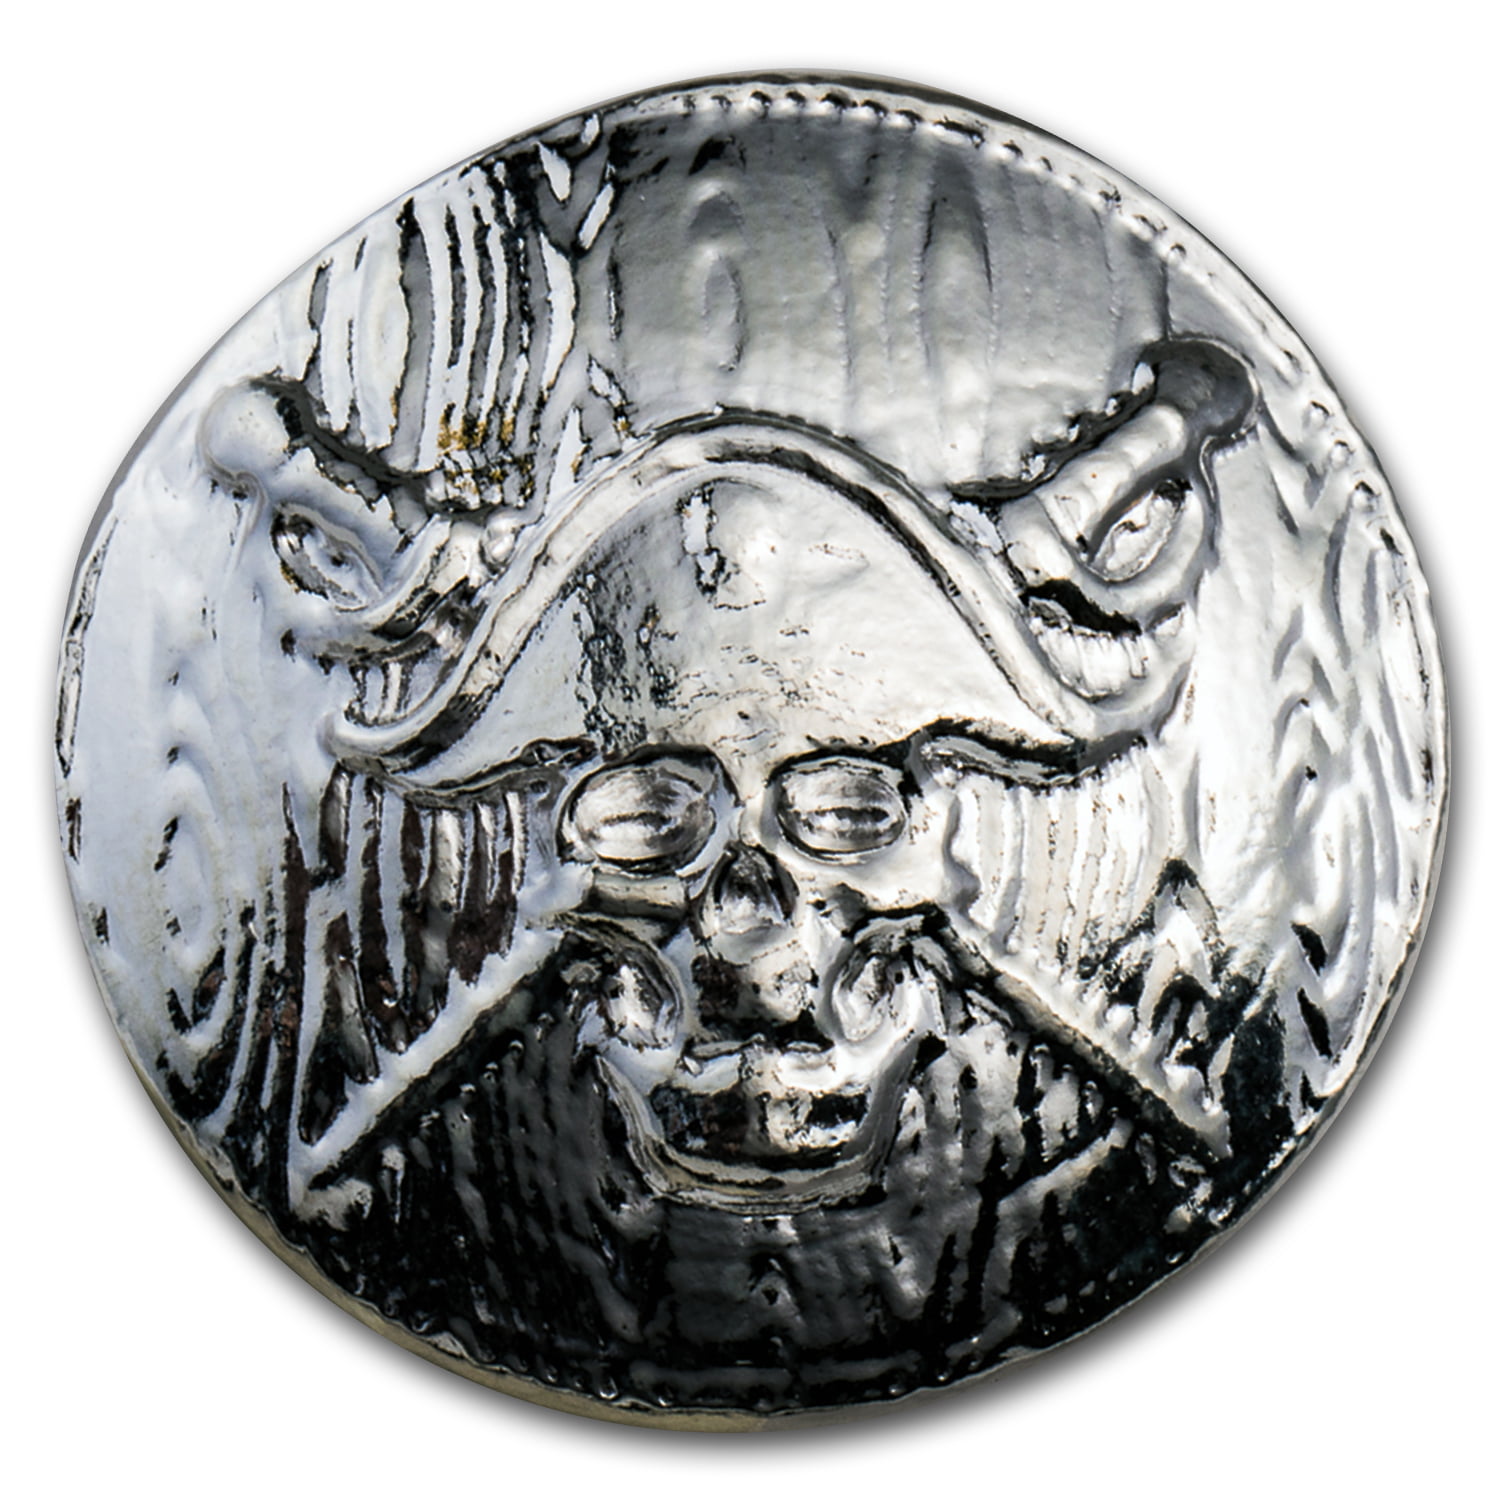 HAND POURED 2016 2 oz Pure Silver HIGH RELIEF ANTIQUE FINISH JOLLY ROGER 